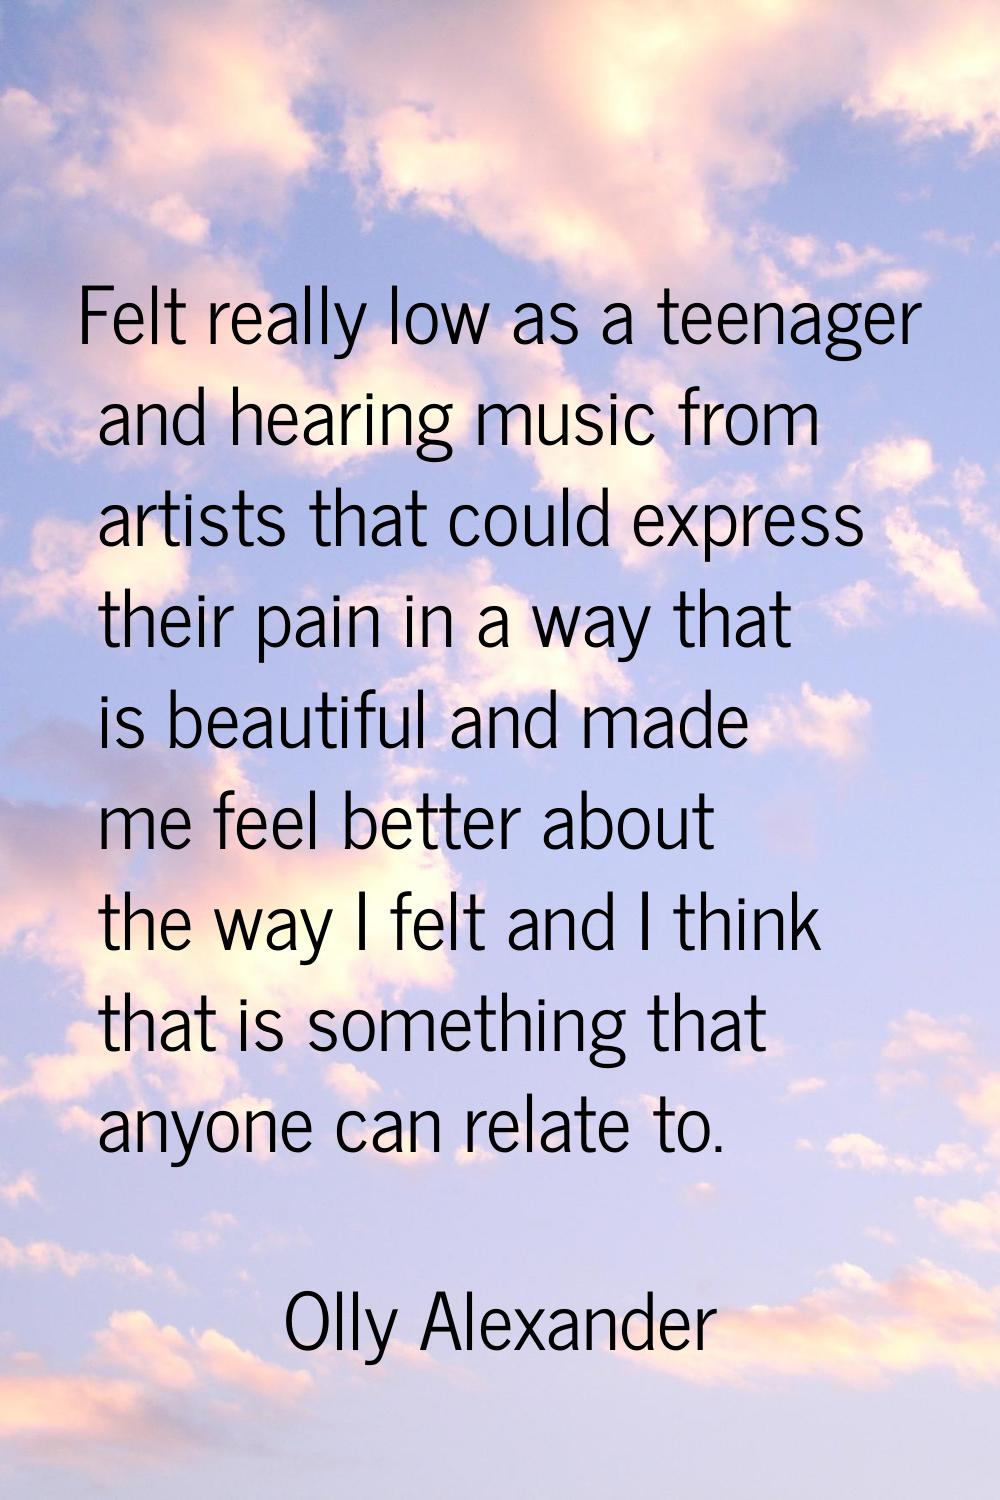 Felt really low as a teenager and hearing music from artists that could express their pain in a way